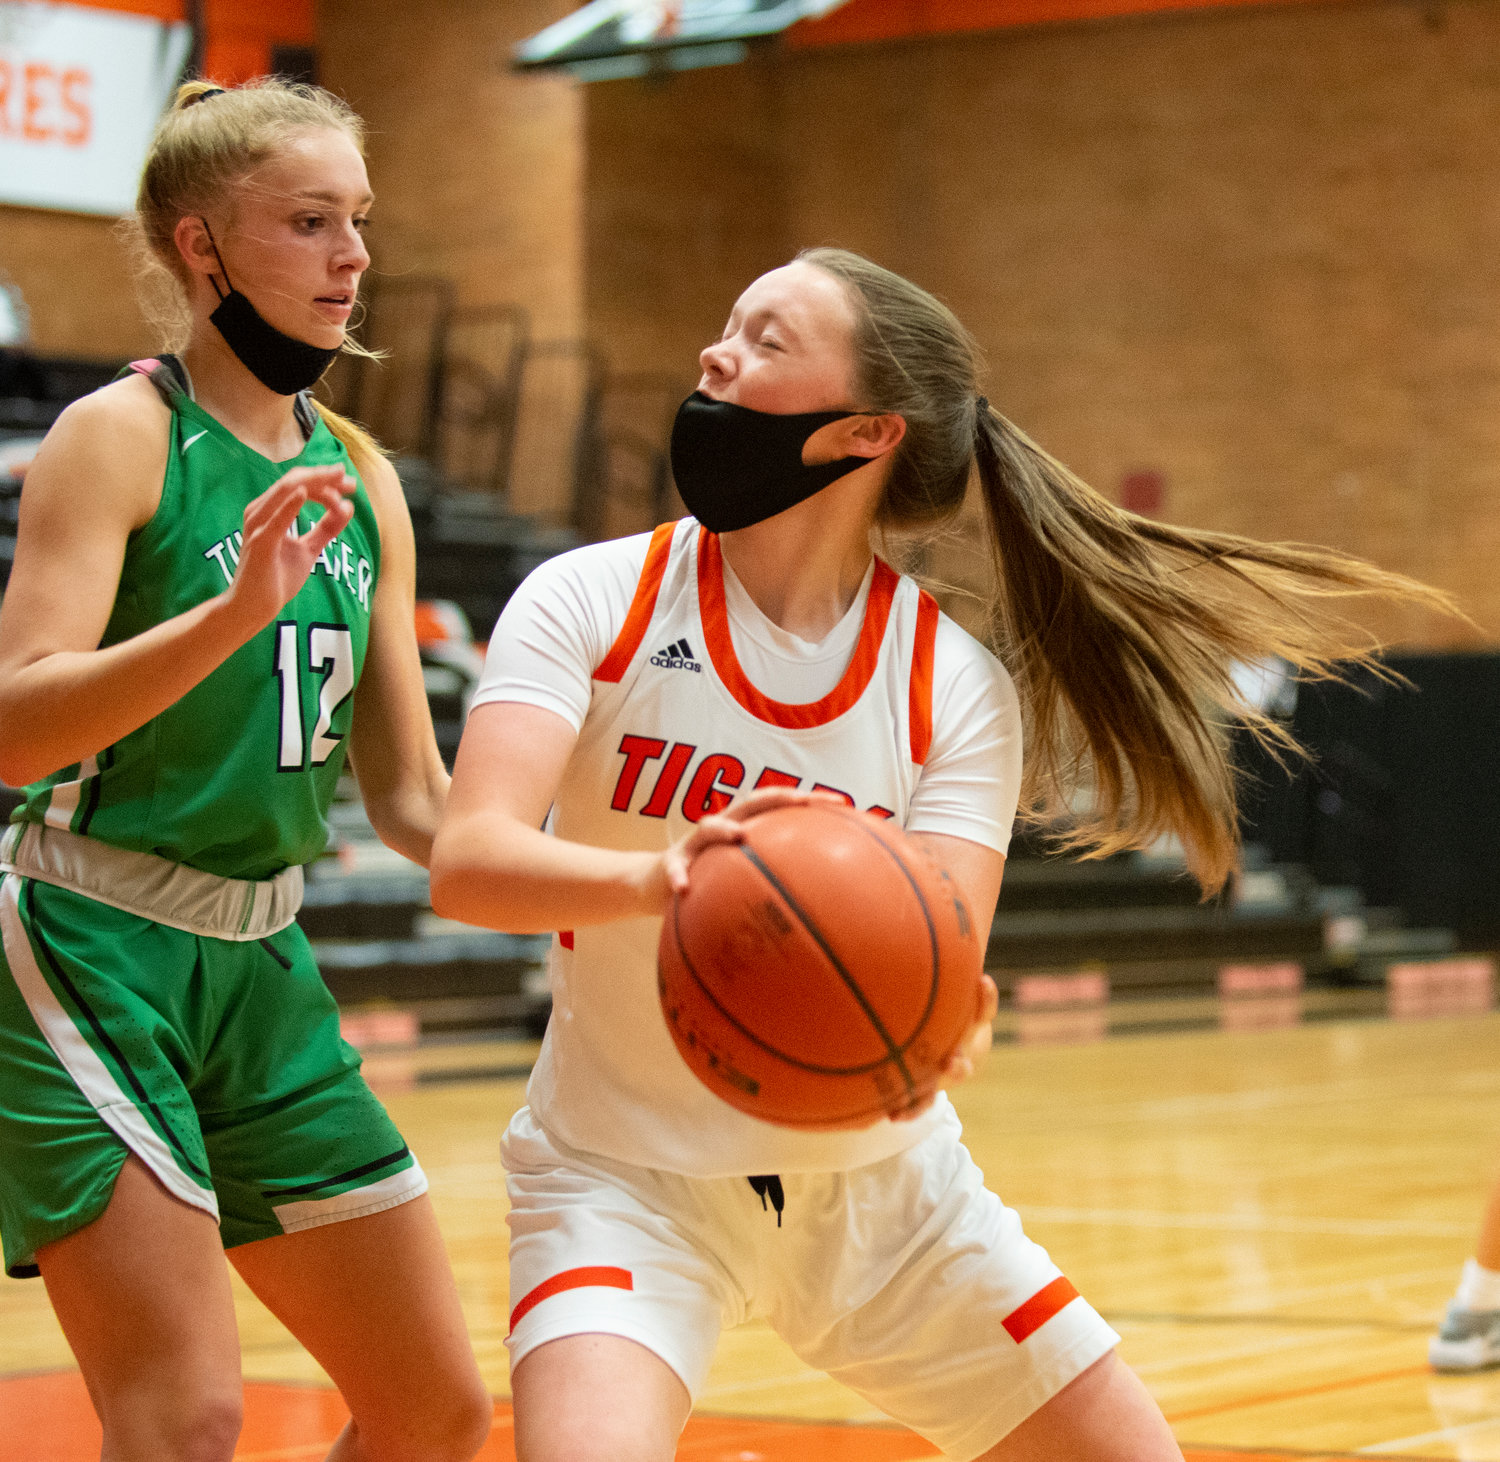 Centralia freshman Gracie Schofield looks for an open shot in the paint with Tumwater junior Aubrey Amendala (12) guarding.